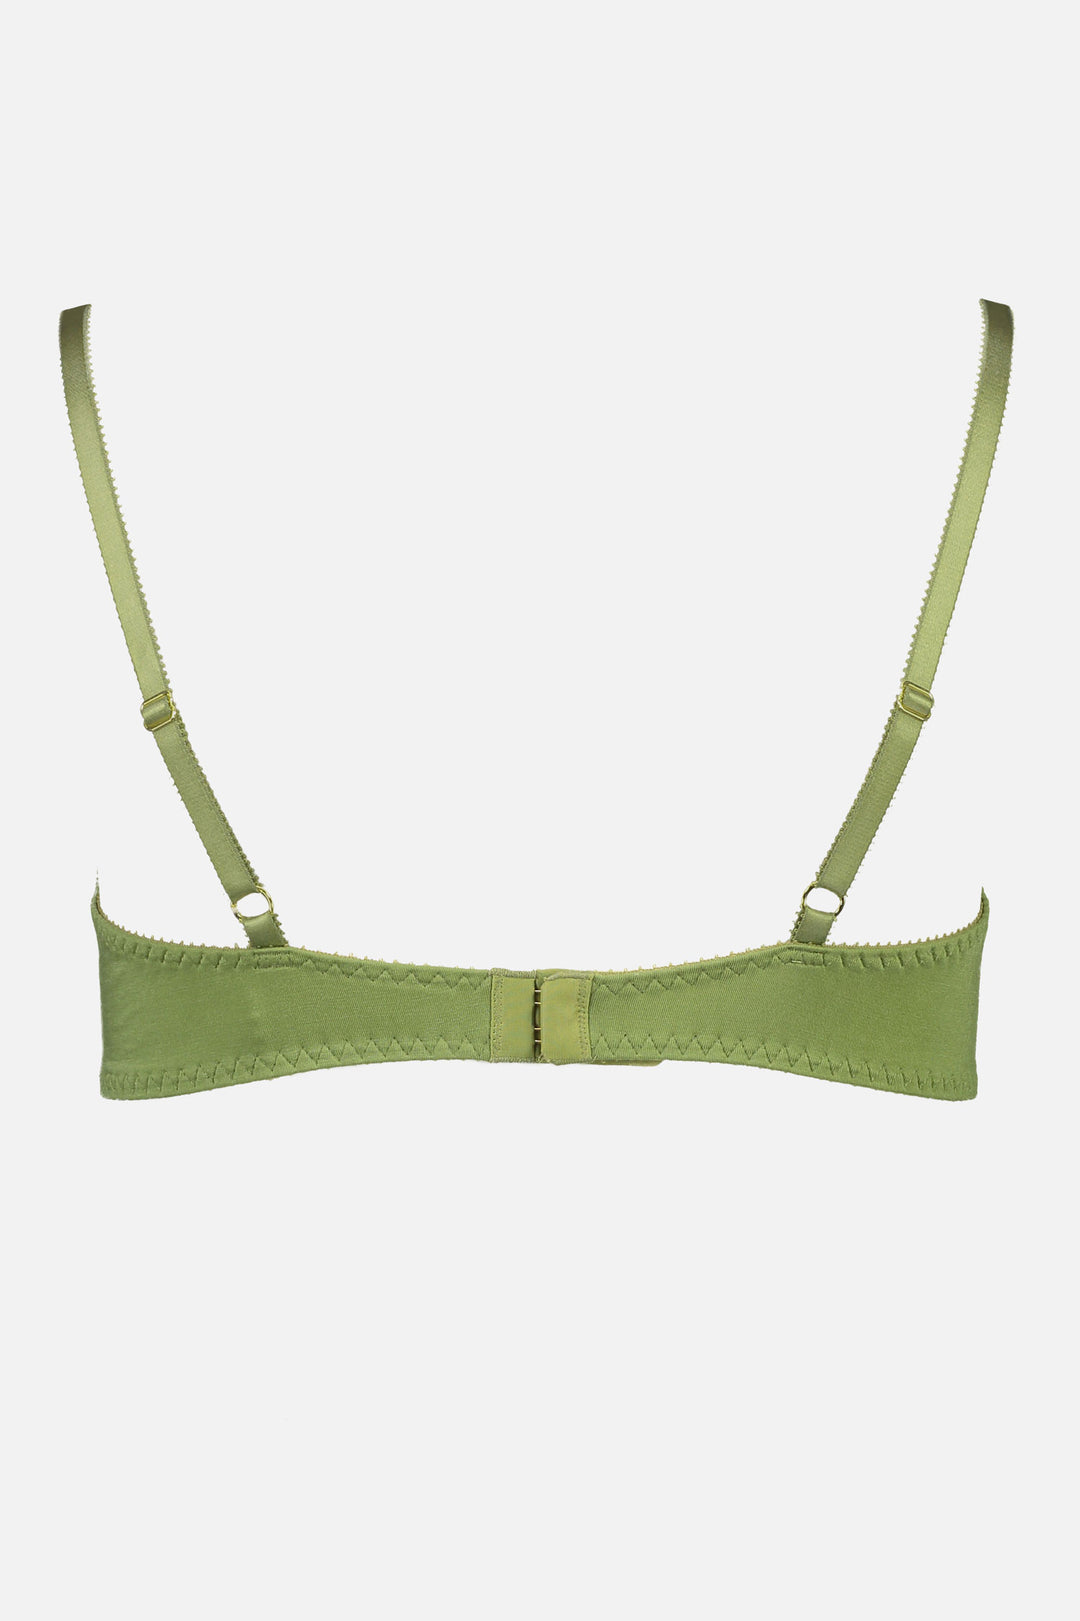 Videris Lingerie Maggie wire free soft cup bra in olive TENCEL™ features adjustable back straps and hook and eyes closure